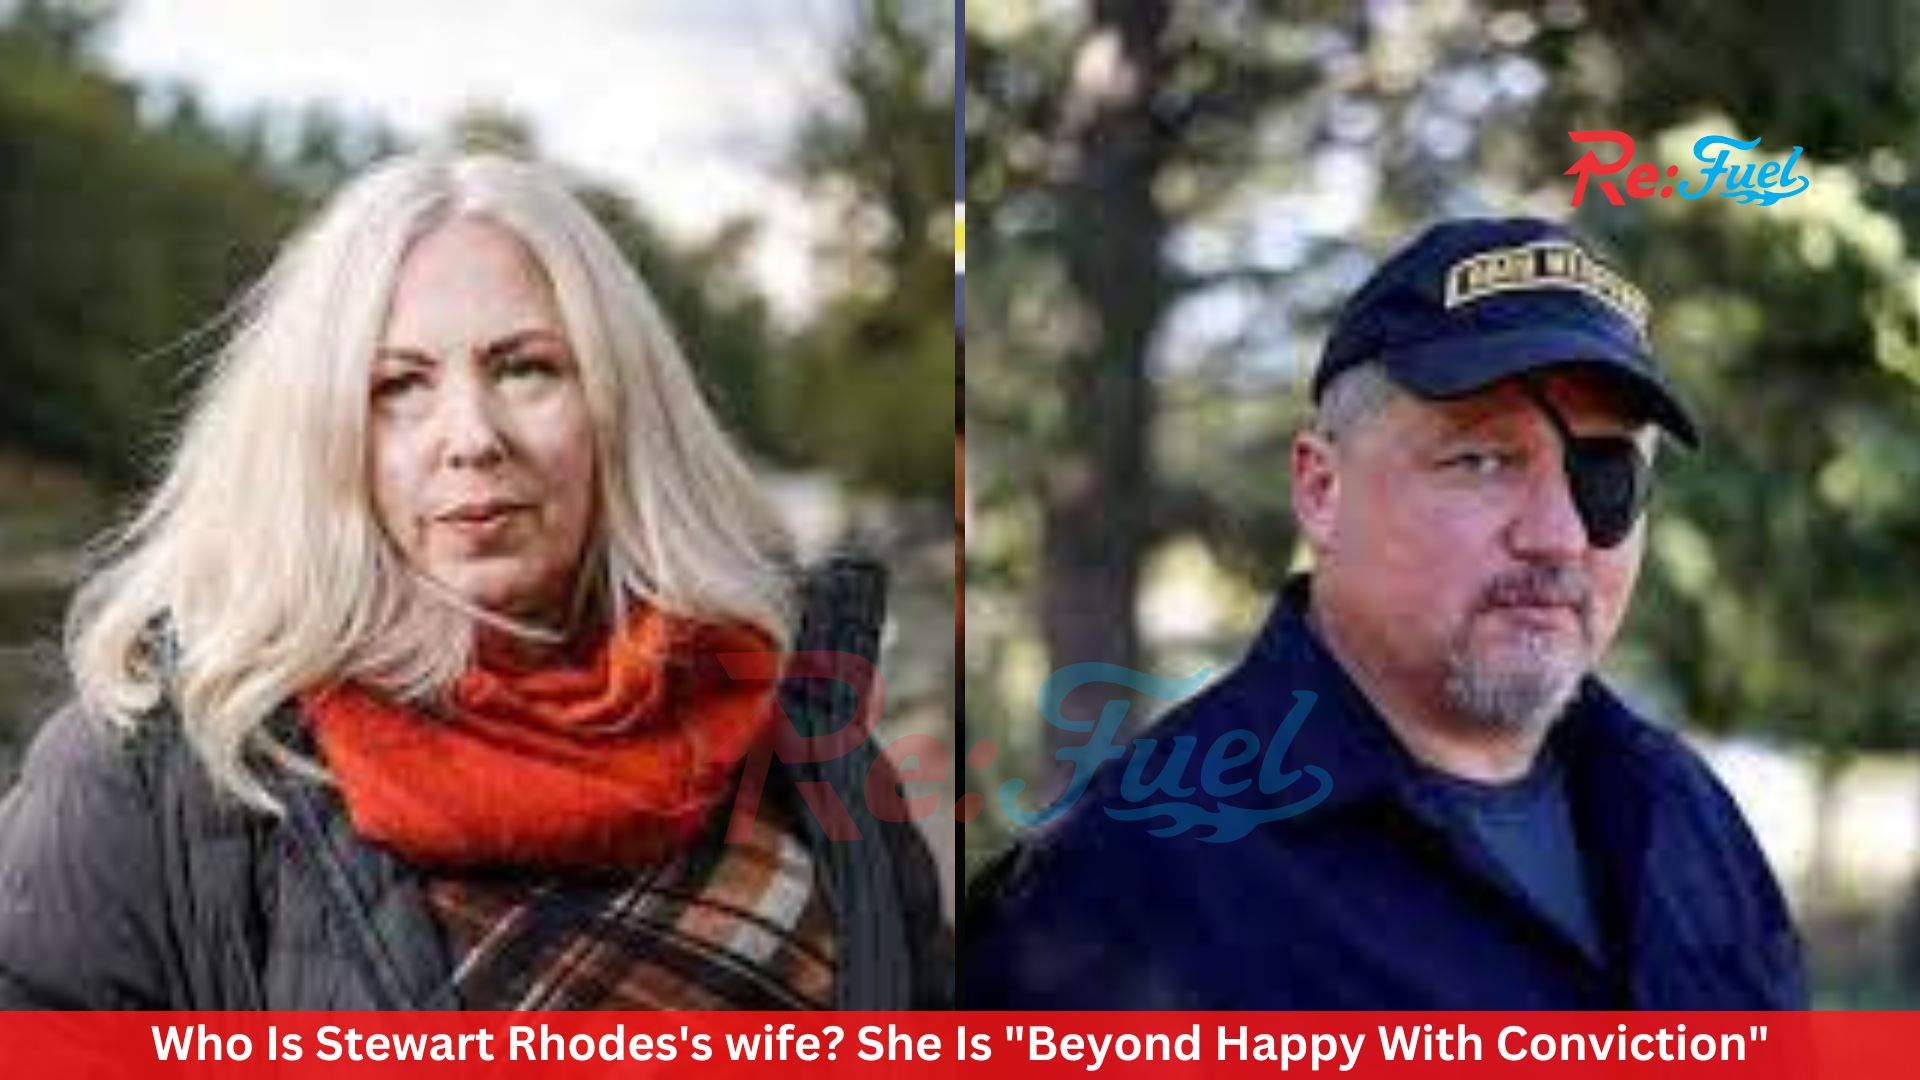 Who Is Stewart Rhodes's wife? She Is "Beyond Happy With Conviction"